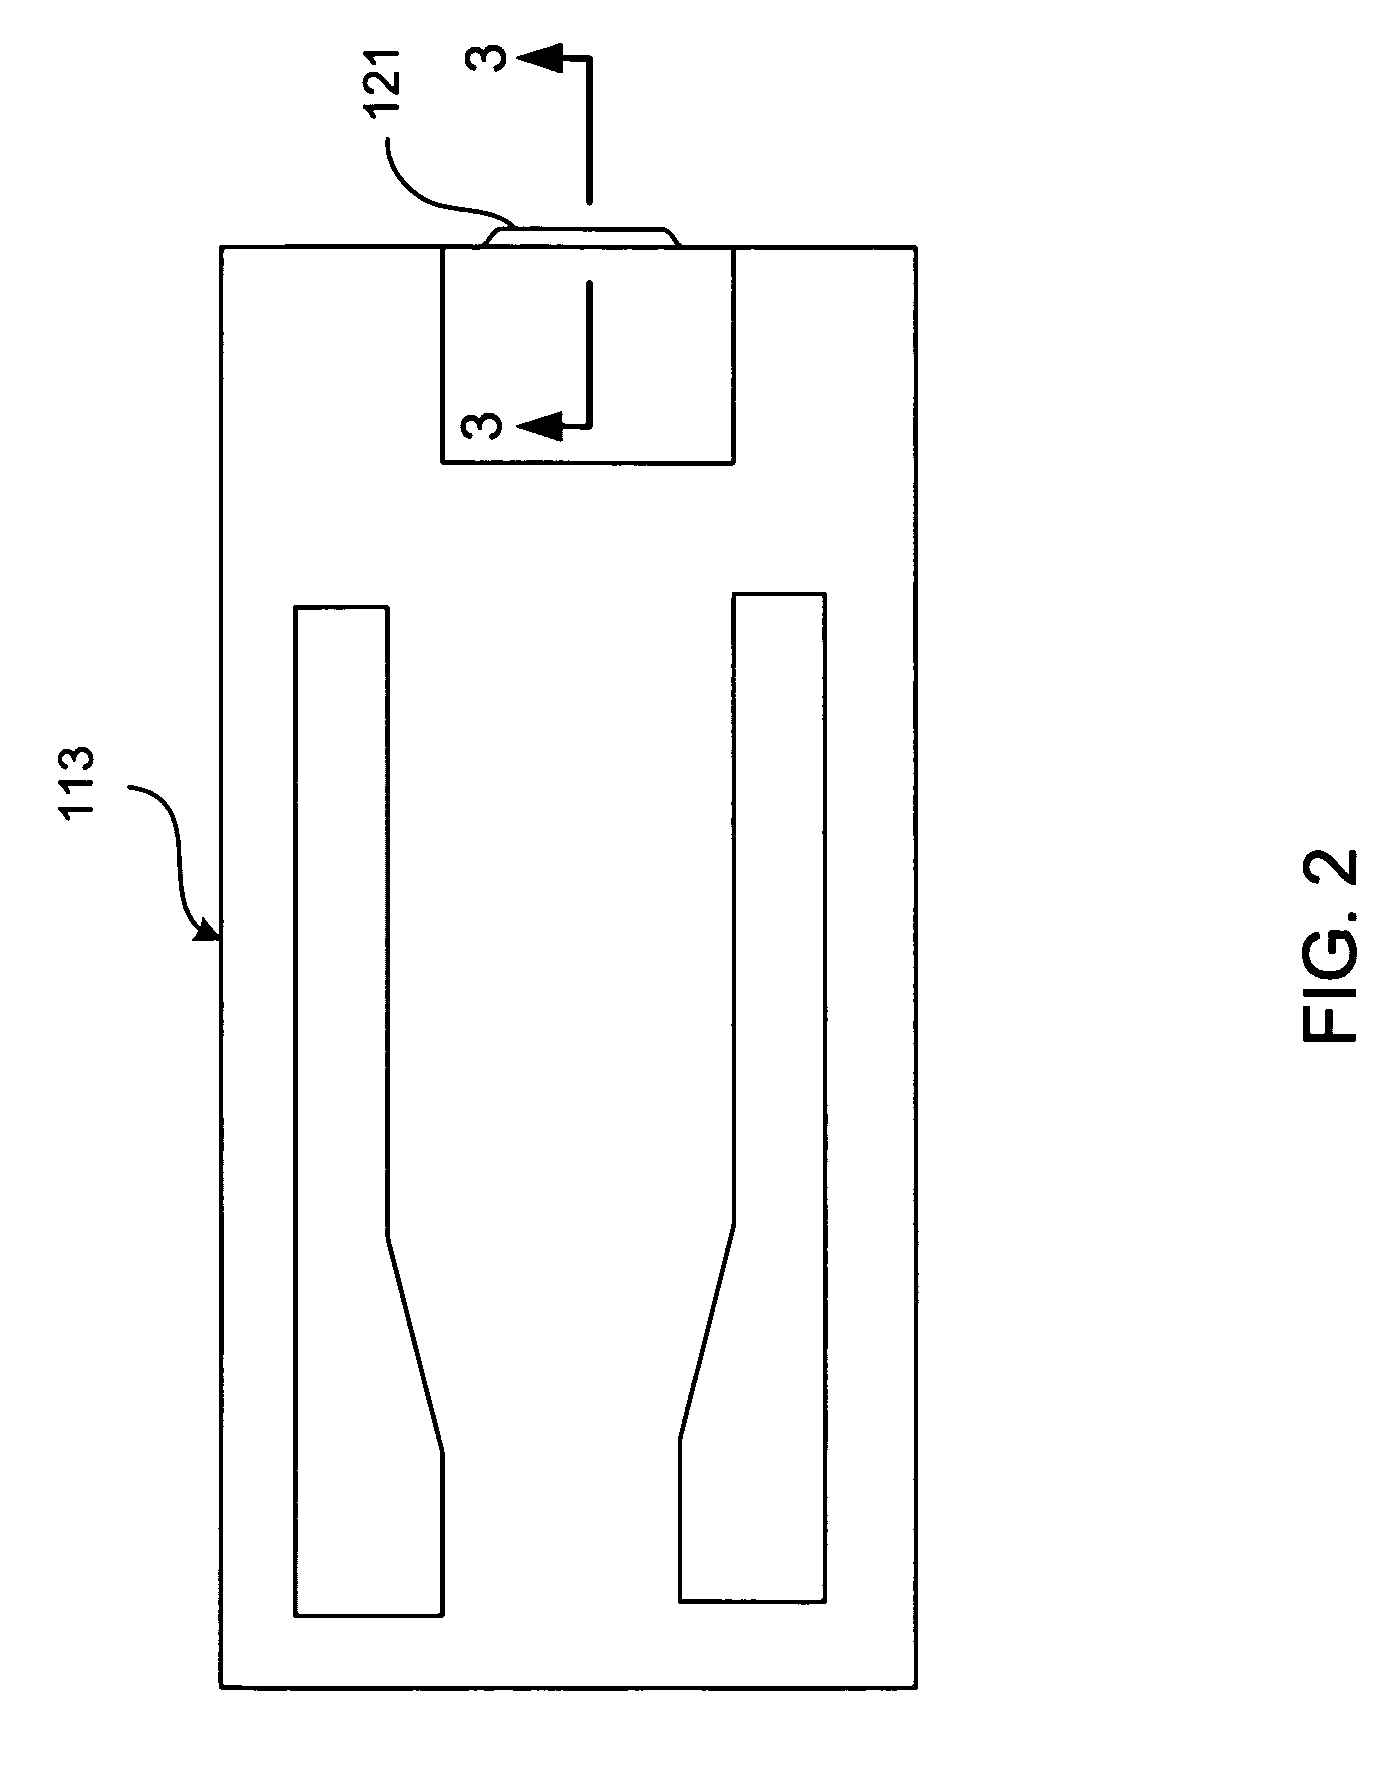 Method of manufacturing a wrap around shield for a perpendicular write pole using a laminated mask